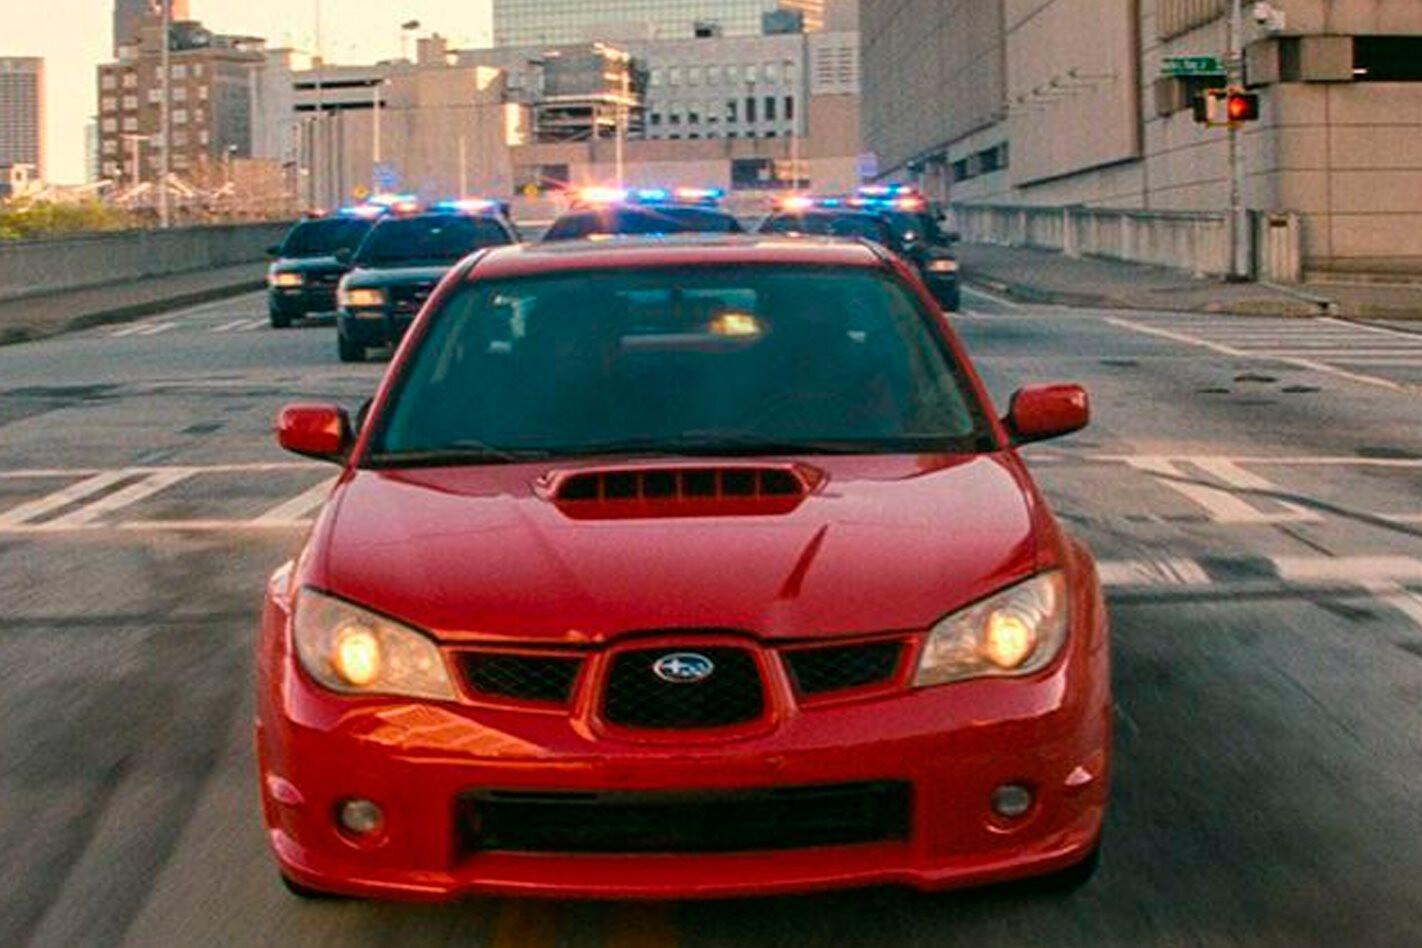 BABY DRIVER (2017) - RIPPER CAR MOVIES